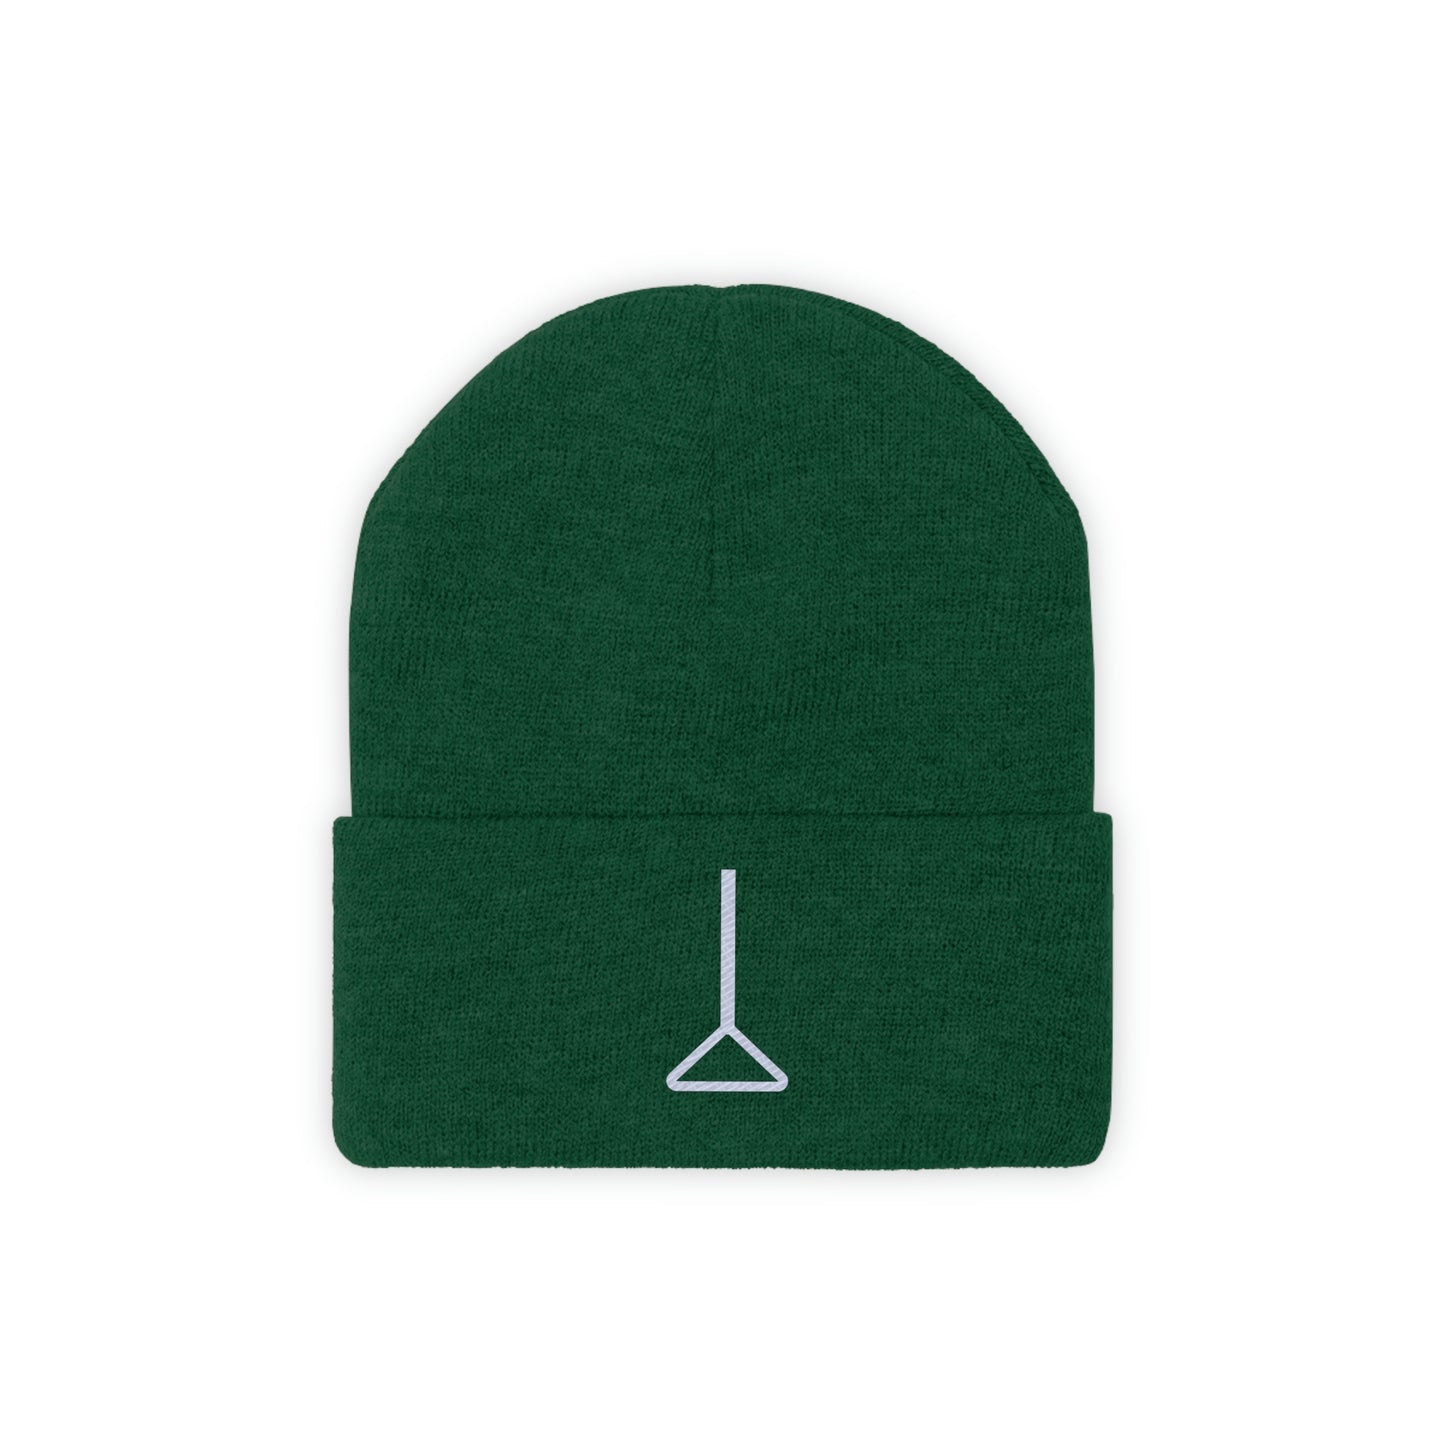 Pull Ripcord embroidered Chainsaws CSMs Knit Beanie